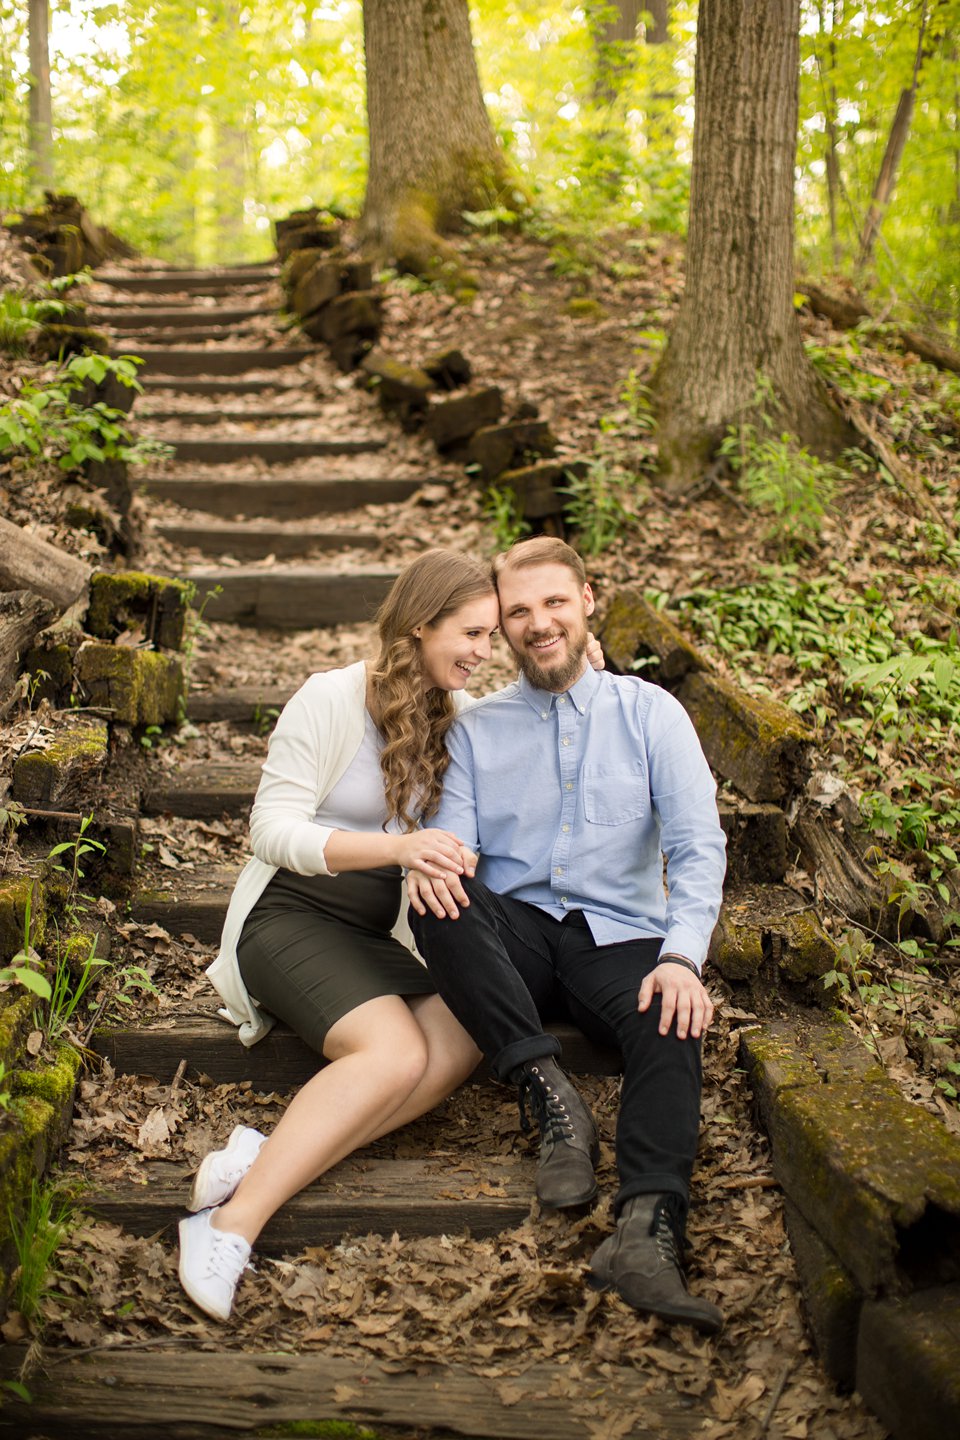 Engagement session photographs at Fitzgerald Park in Grand Ledge, Michigan